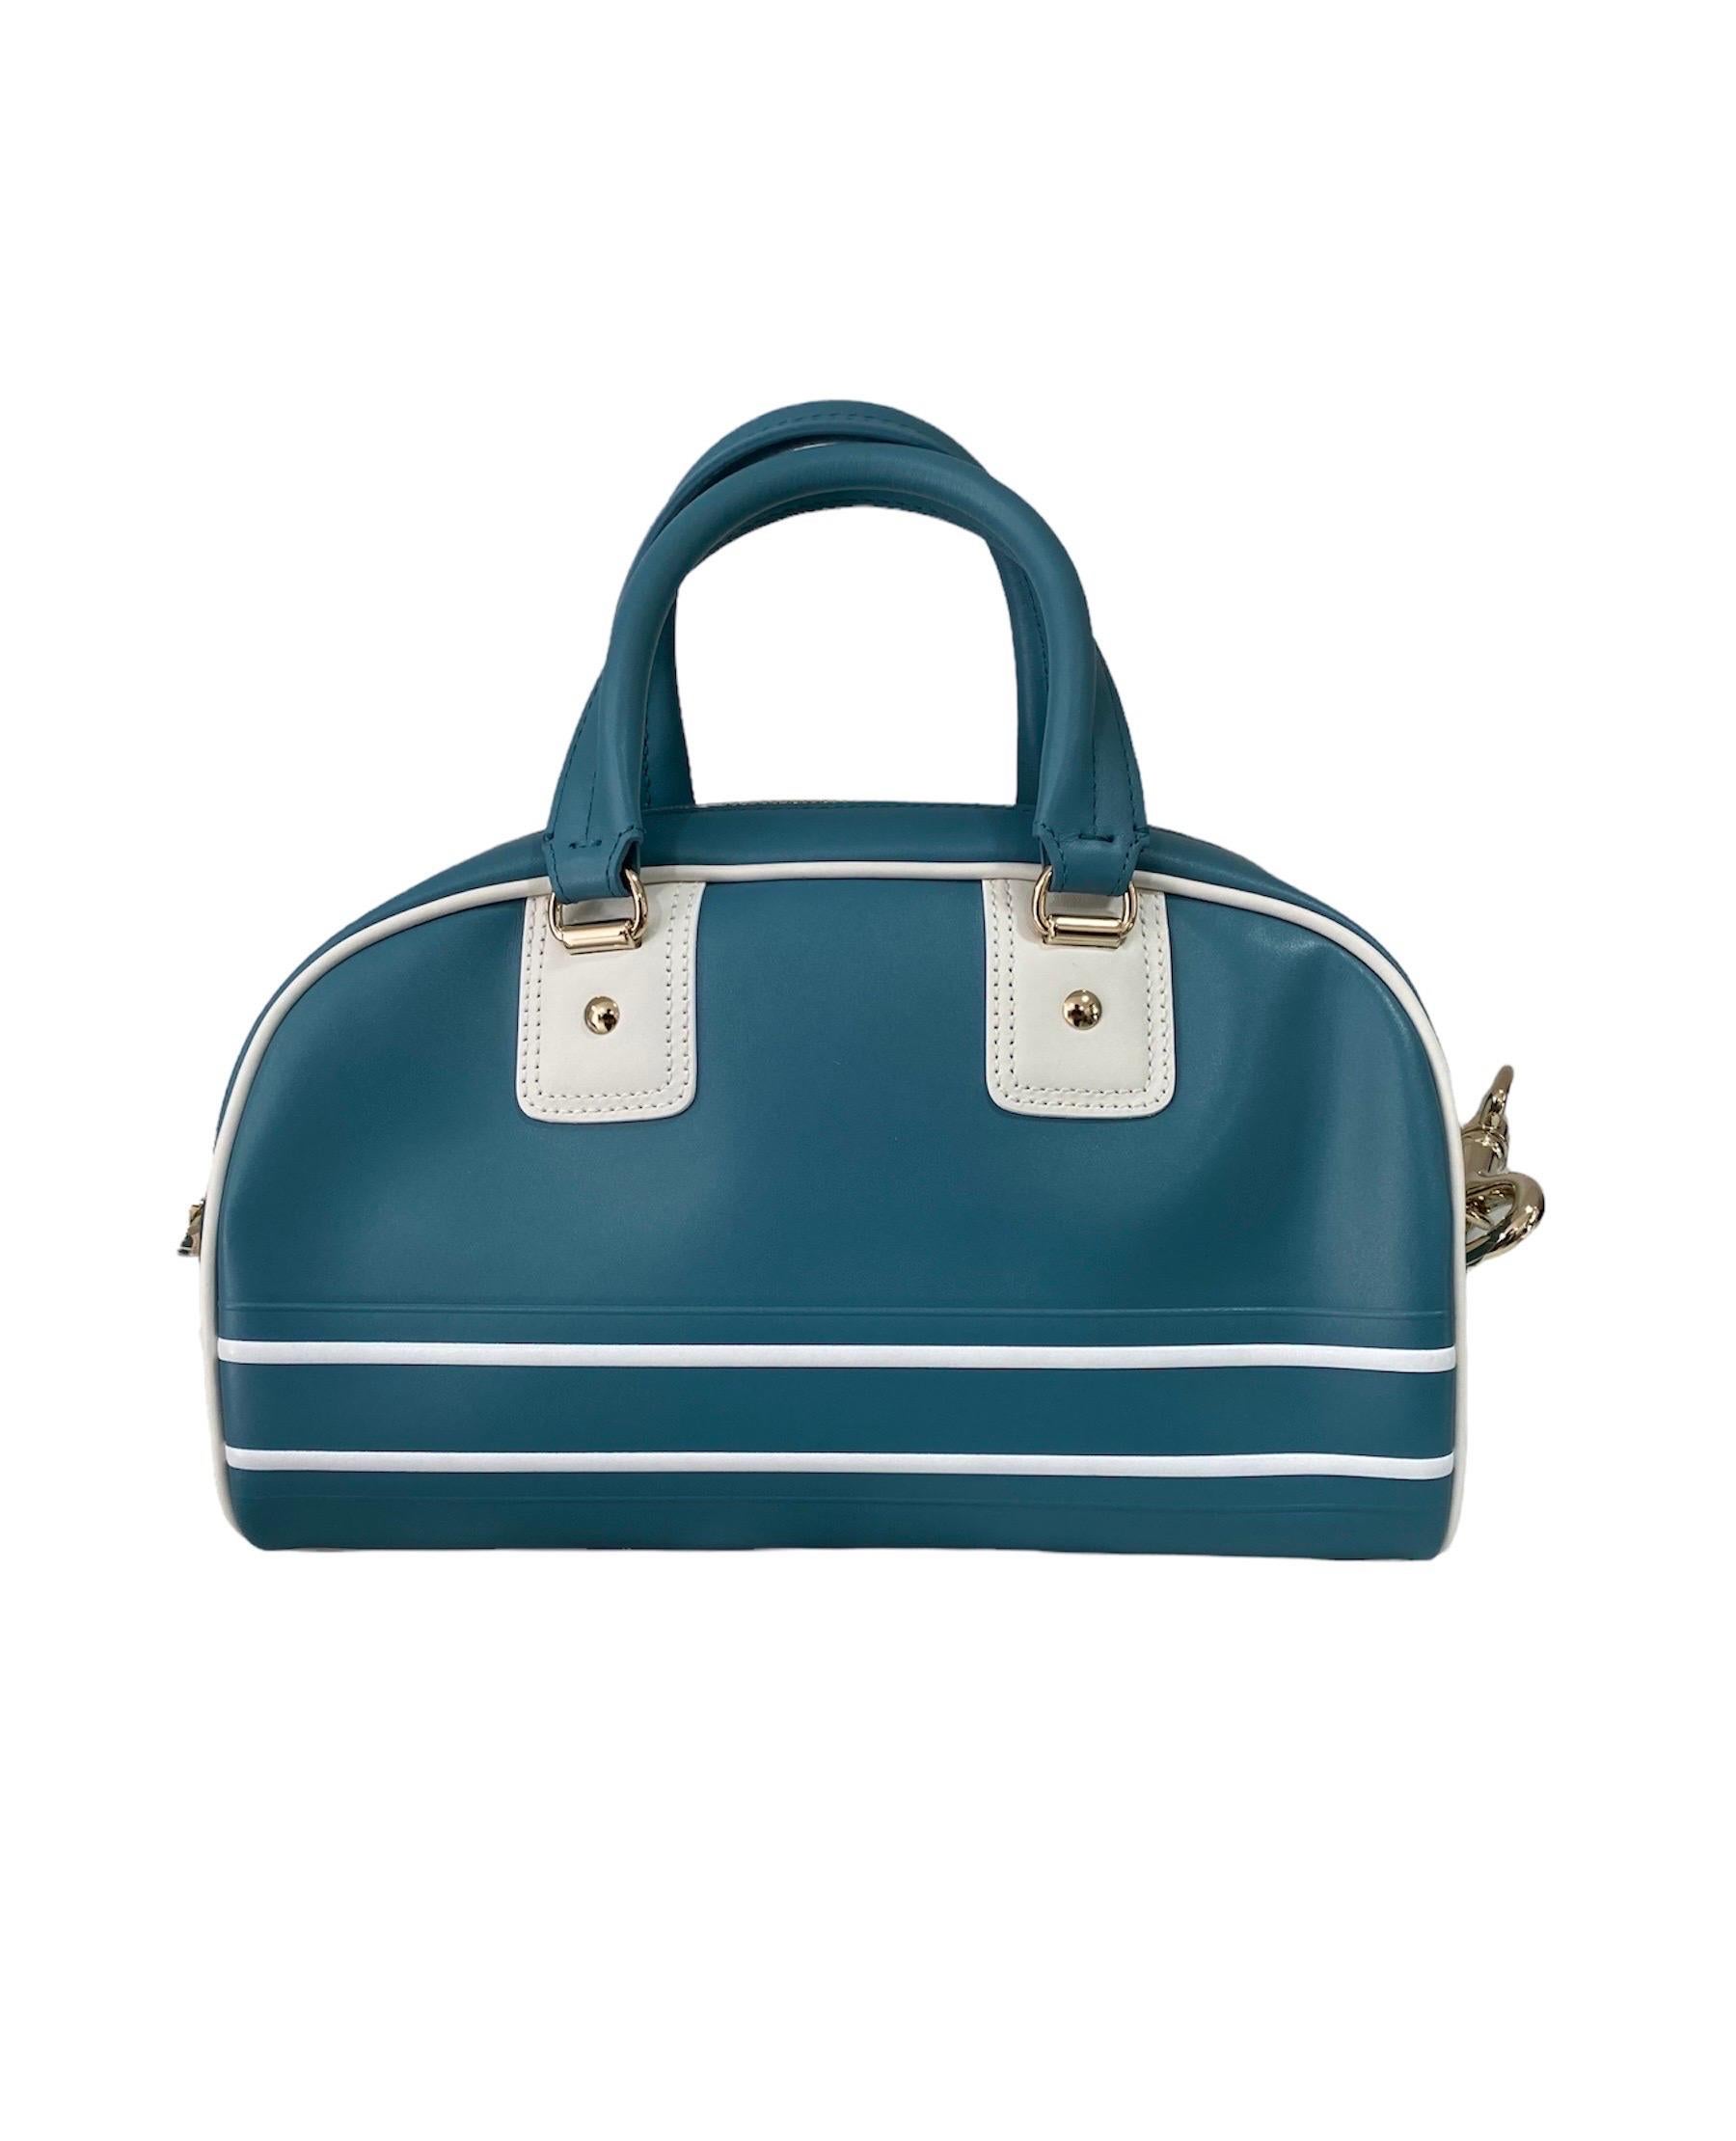 The Dior Vibe bowling bag with zip, designed by Maria Grazia Chiuri, is back in a new version that combines the canons of sportswear with the sartorial spirit of the Maison. Made of smooth blue calfskin, it is decorated with the “CHRISTIAN DIOR